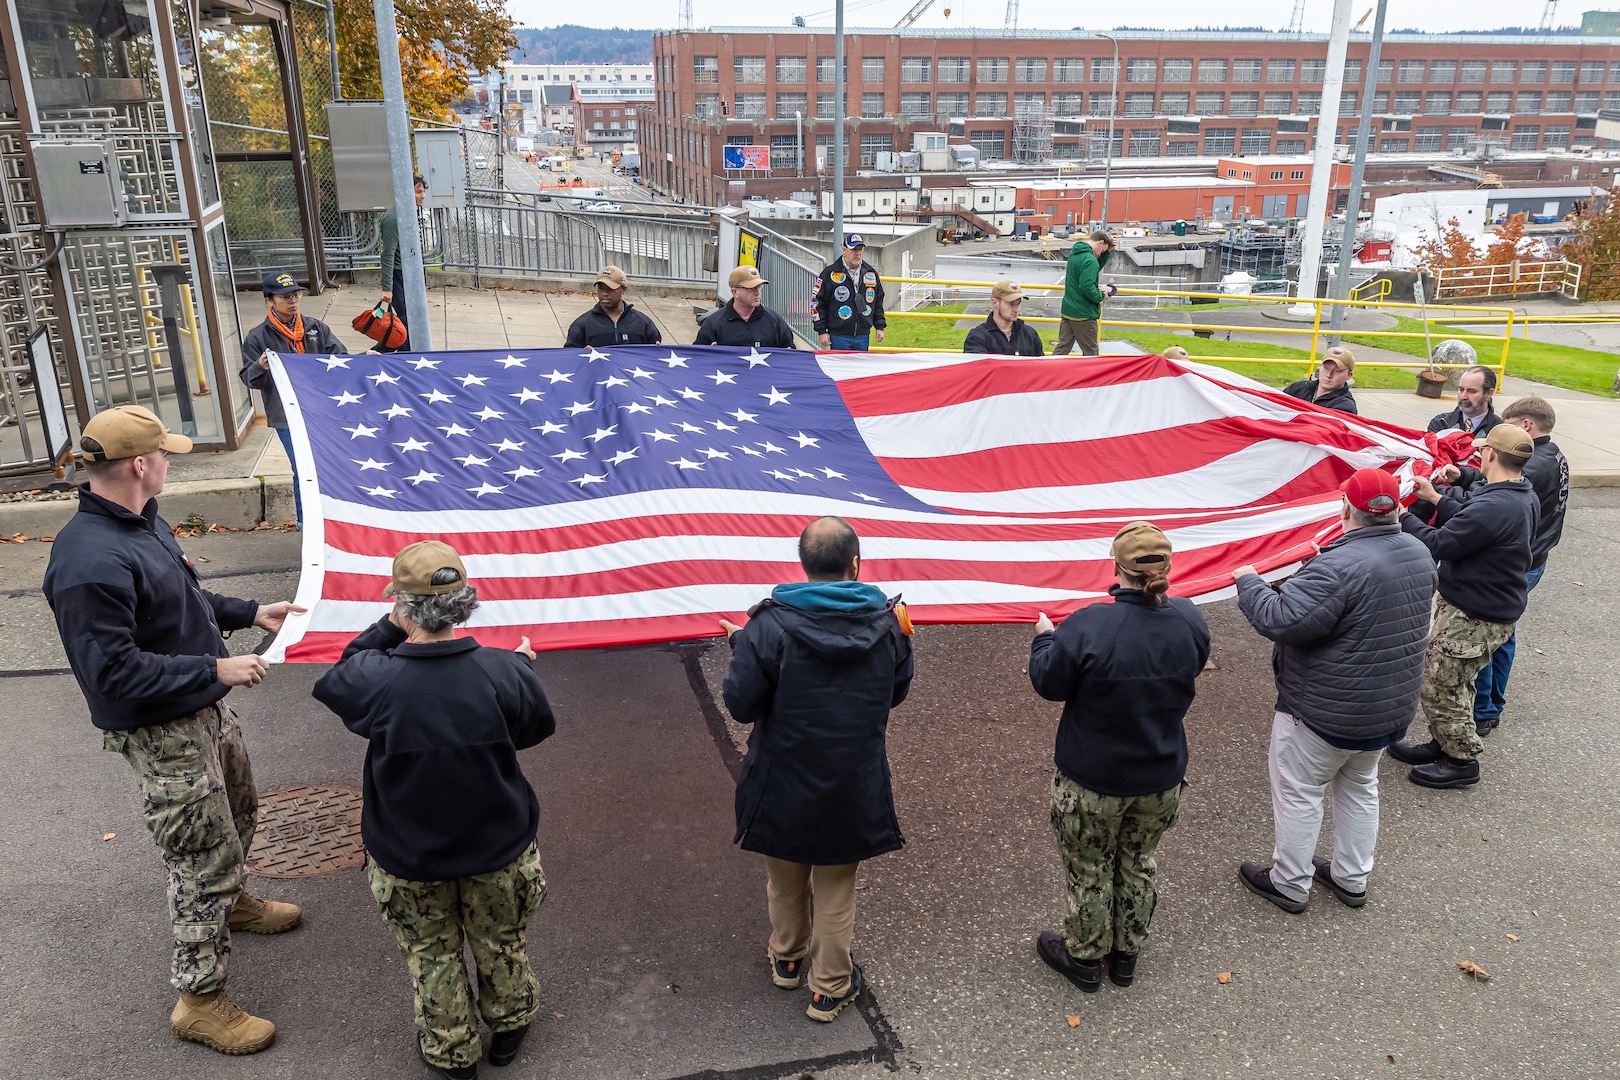 A group of PSNS & IMF Sailors and military veterans prepare to hoist a new American flag near the State Street Gate Entrance at Puget Sound Naval Shipyard & Intermediate Maintenance Facility in Bremerton, Wash. Nov. 9, 2023, during a special Veterans Day flag-replacement ceremony hosted by the Veterans Employee Resource Group. (U.S. Navy photo by Ben Hutto)